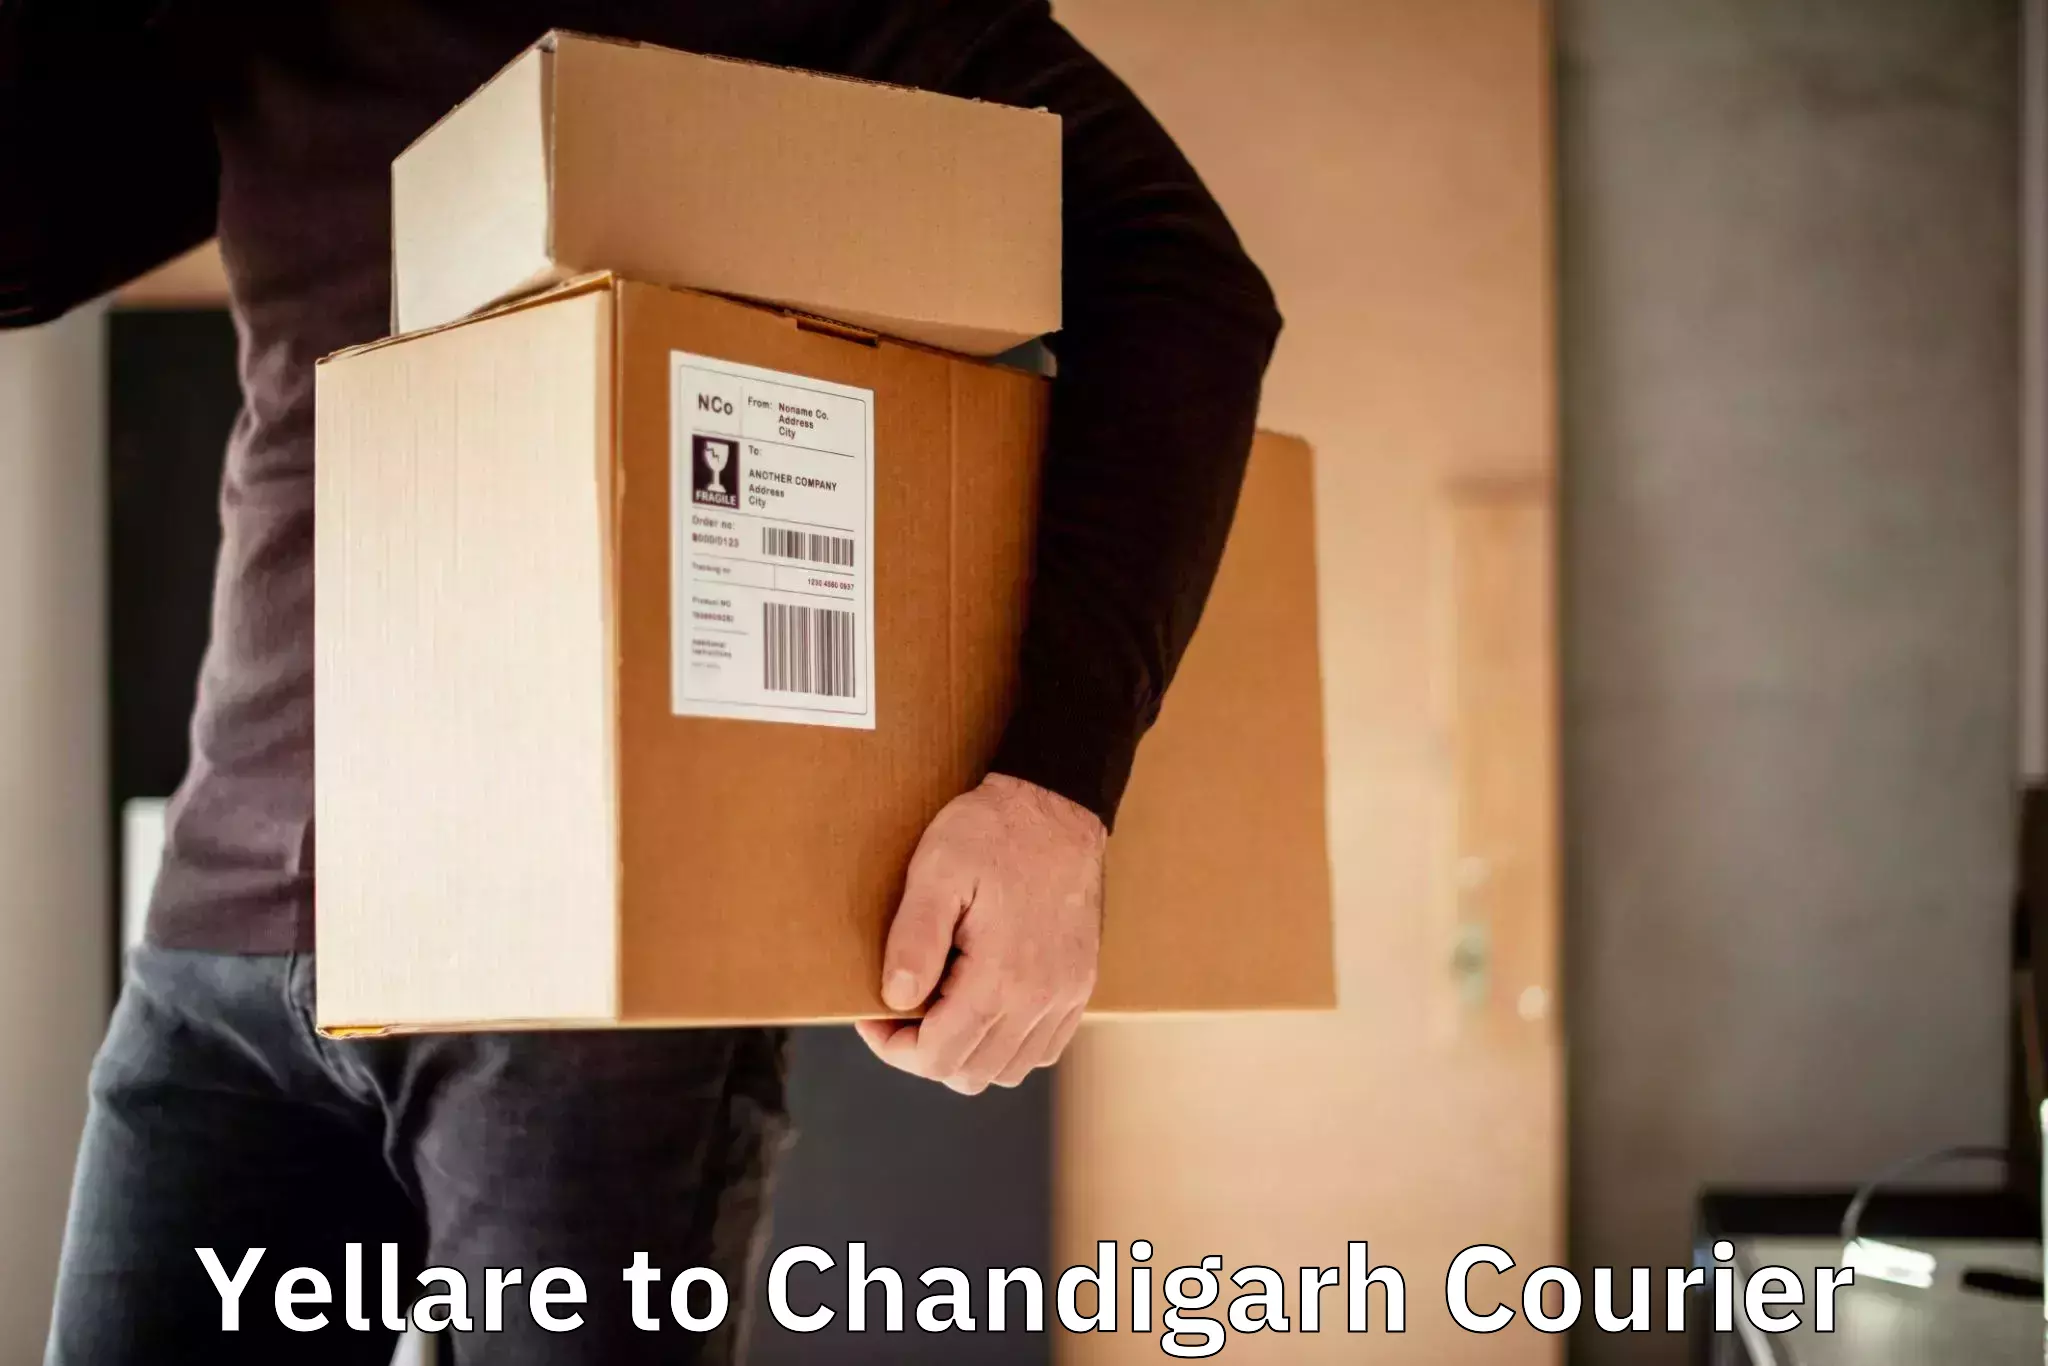 Fast shipping solutions Yellare to Chandigarh